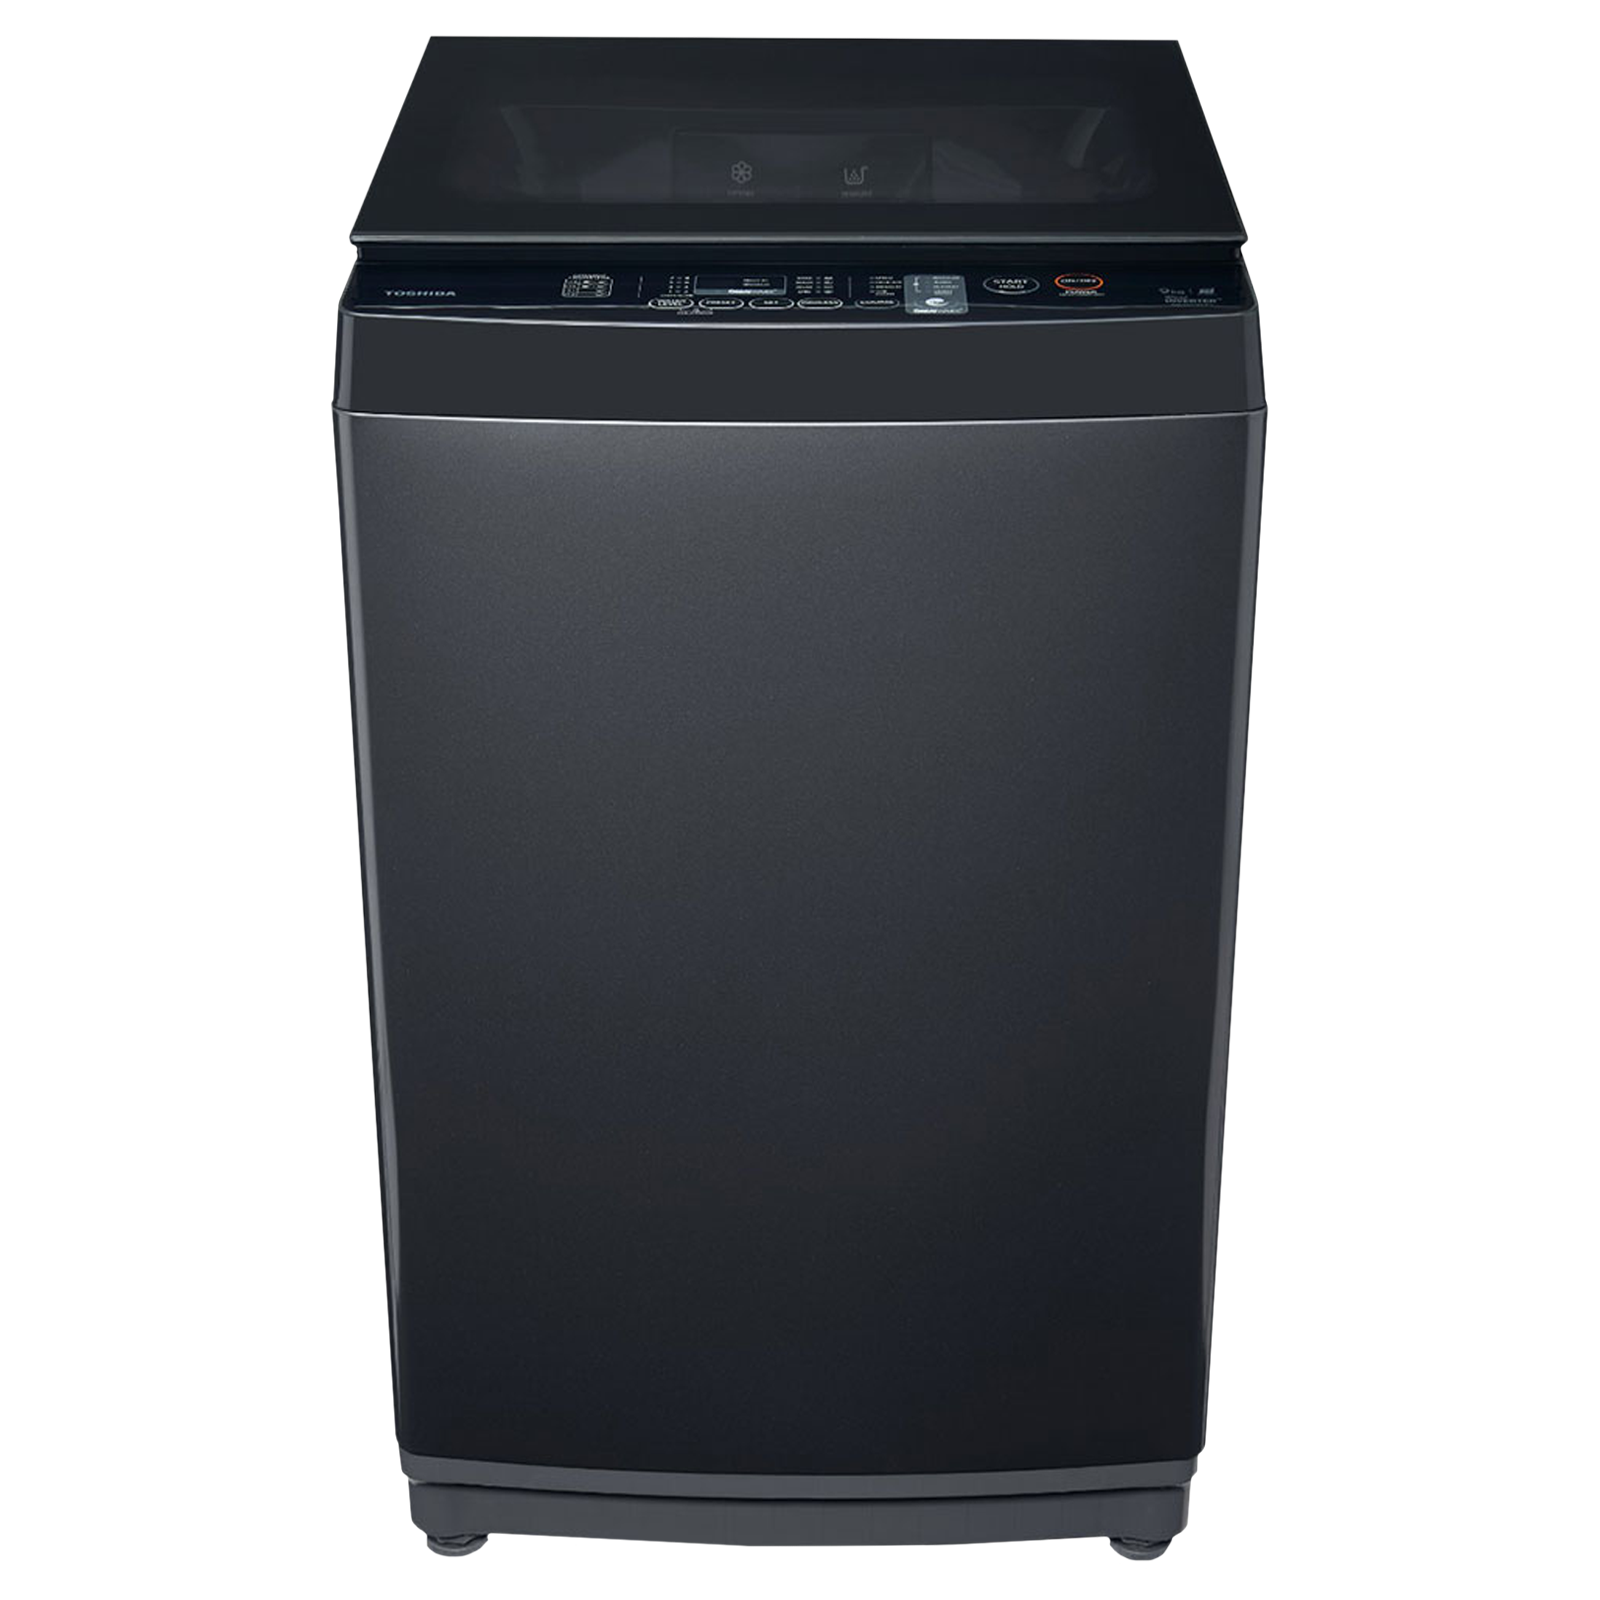 TOSHIBA 8 kg 5 Star Inverter Fully Automatic Top Load Washing Machine  (AW-DJ900D-IND, i-Clean Function, Dark Silver)